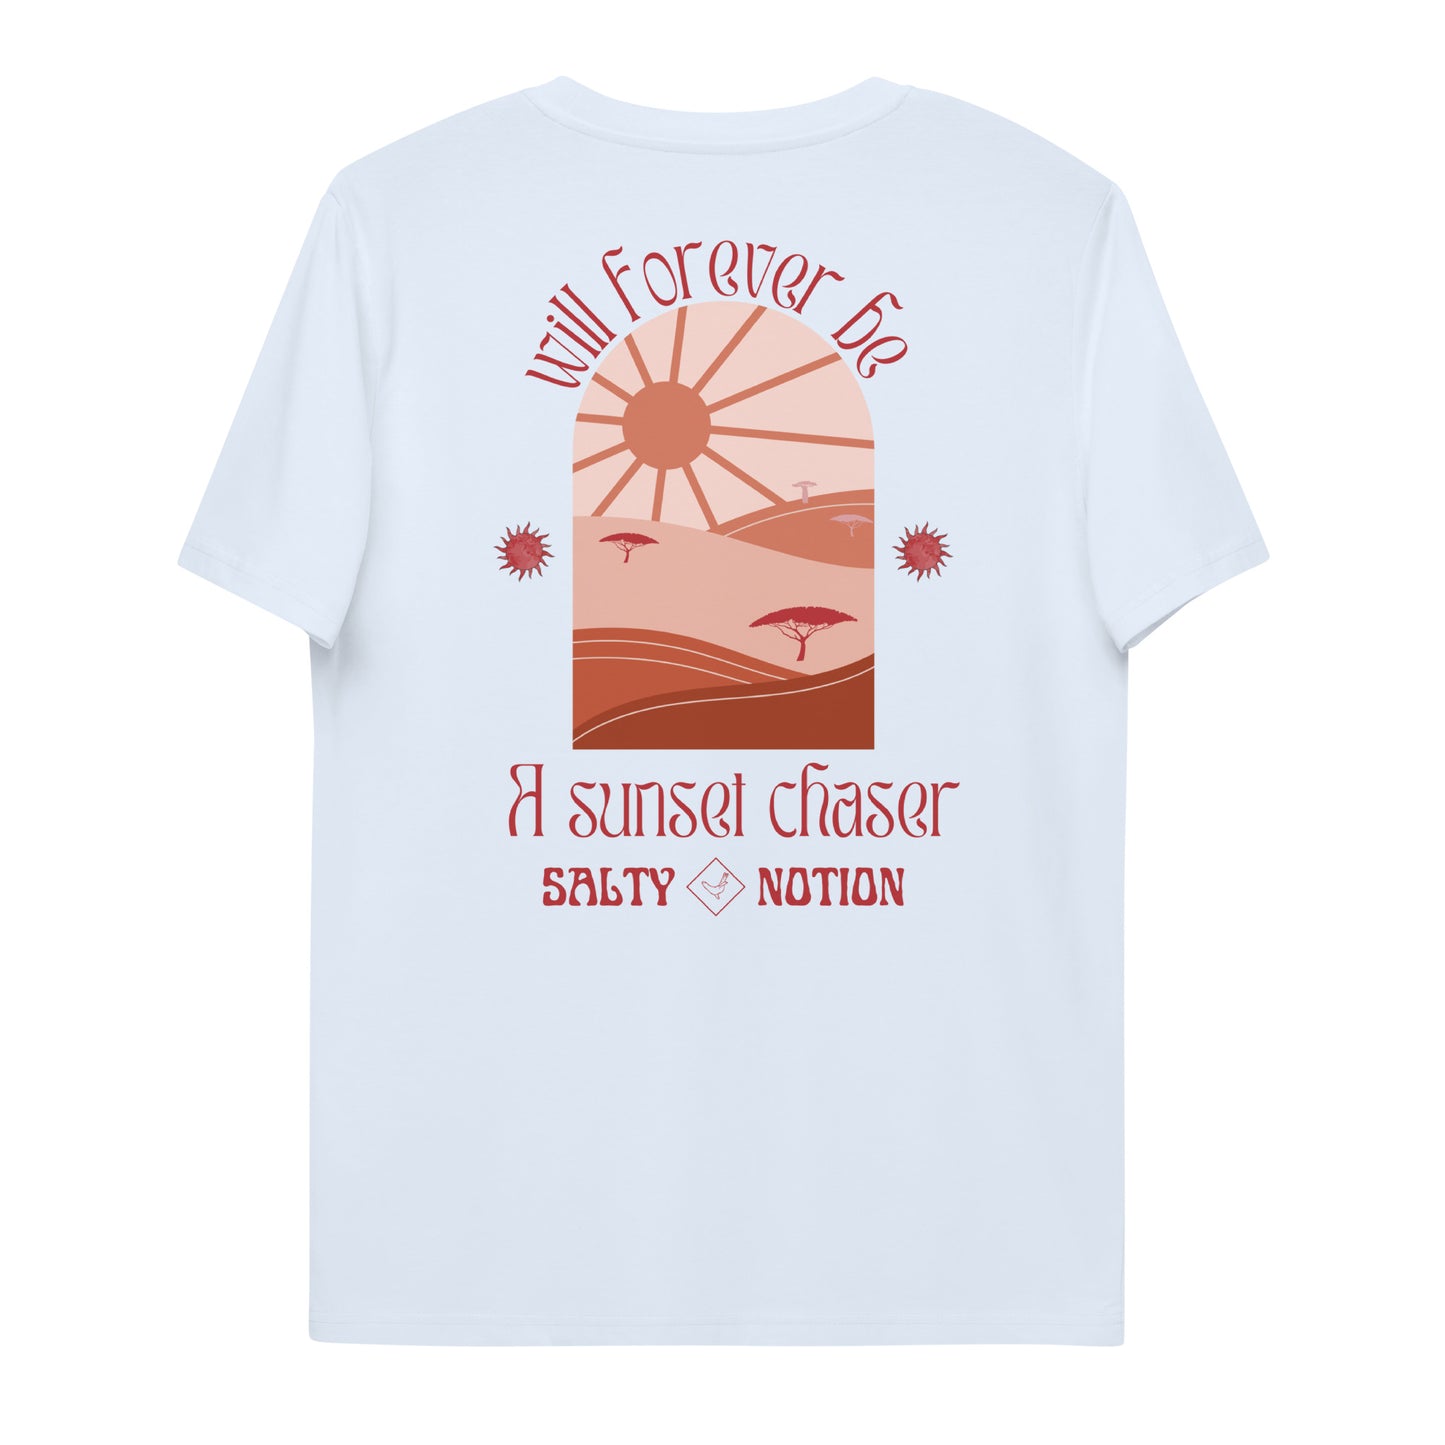 Forever Be A Sunset Chaser Organic Cotton Tee